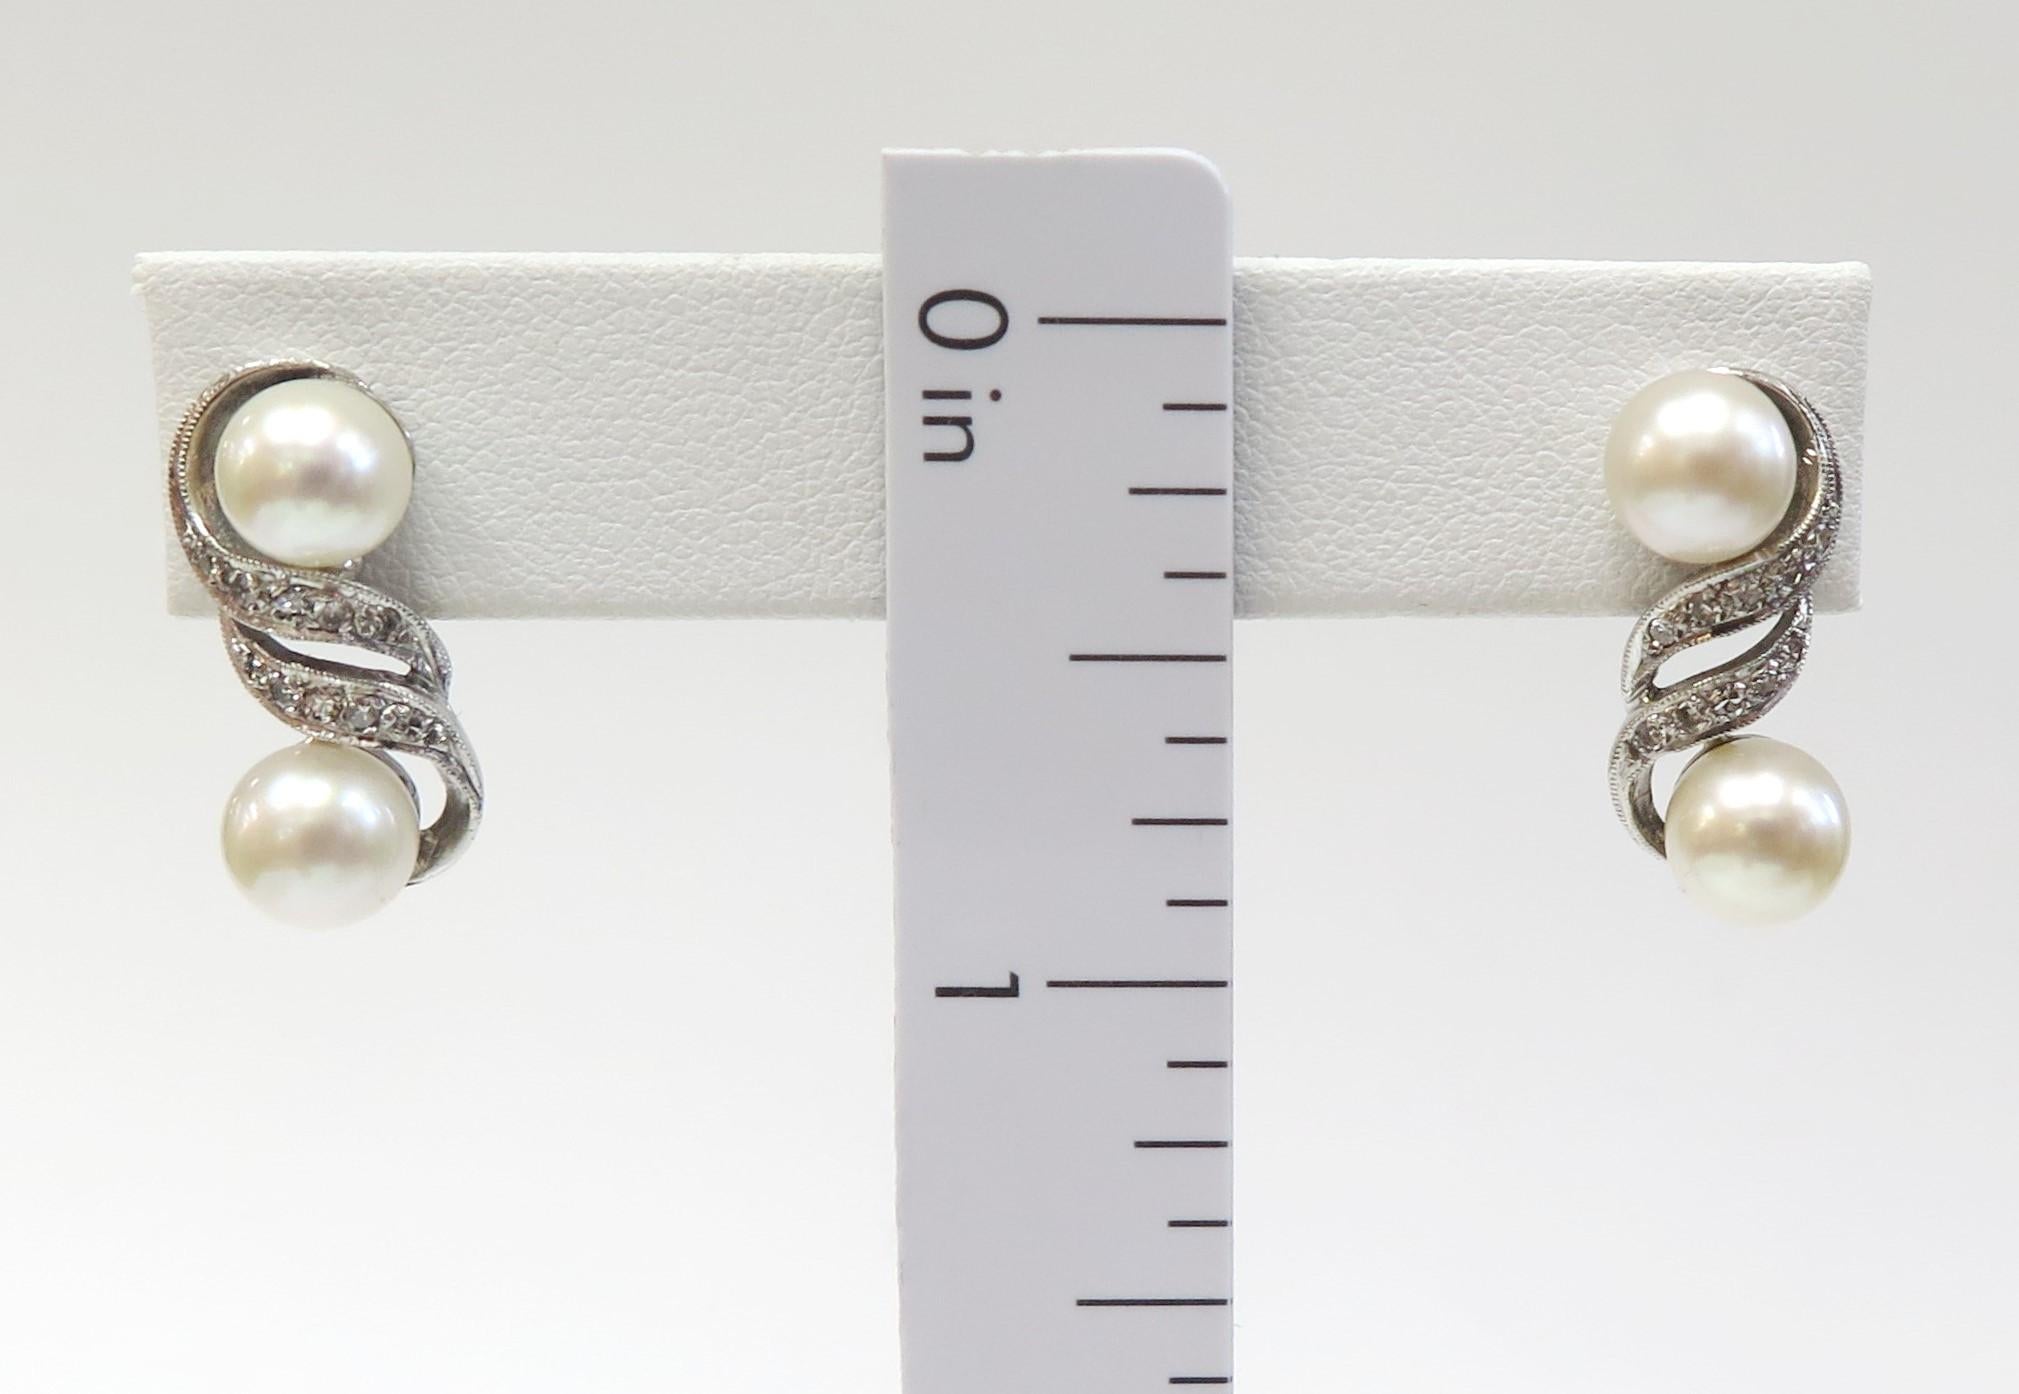 Elegant 1950s double pearl earrings with glittery Diamond ribbon swirls.

14 Karat white gold
Pearls: 7mm
20 Single Cut Diamonds total weight: 0.24 Carat (5 stone chipped - can not see with naked eye)
5.8 Grams
Length: 3/4 inch
